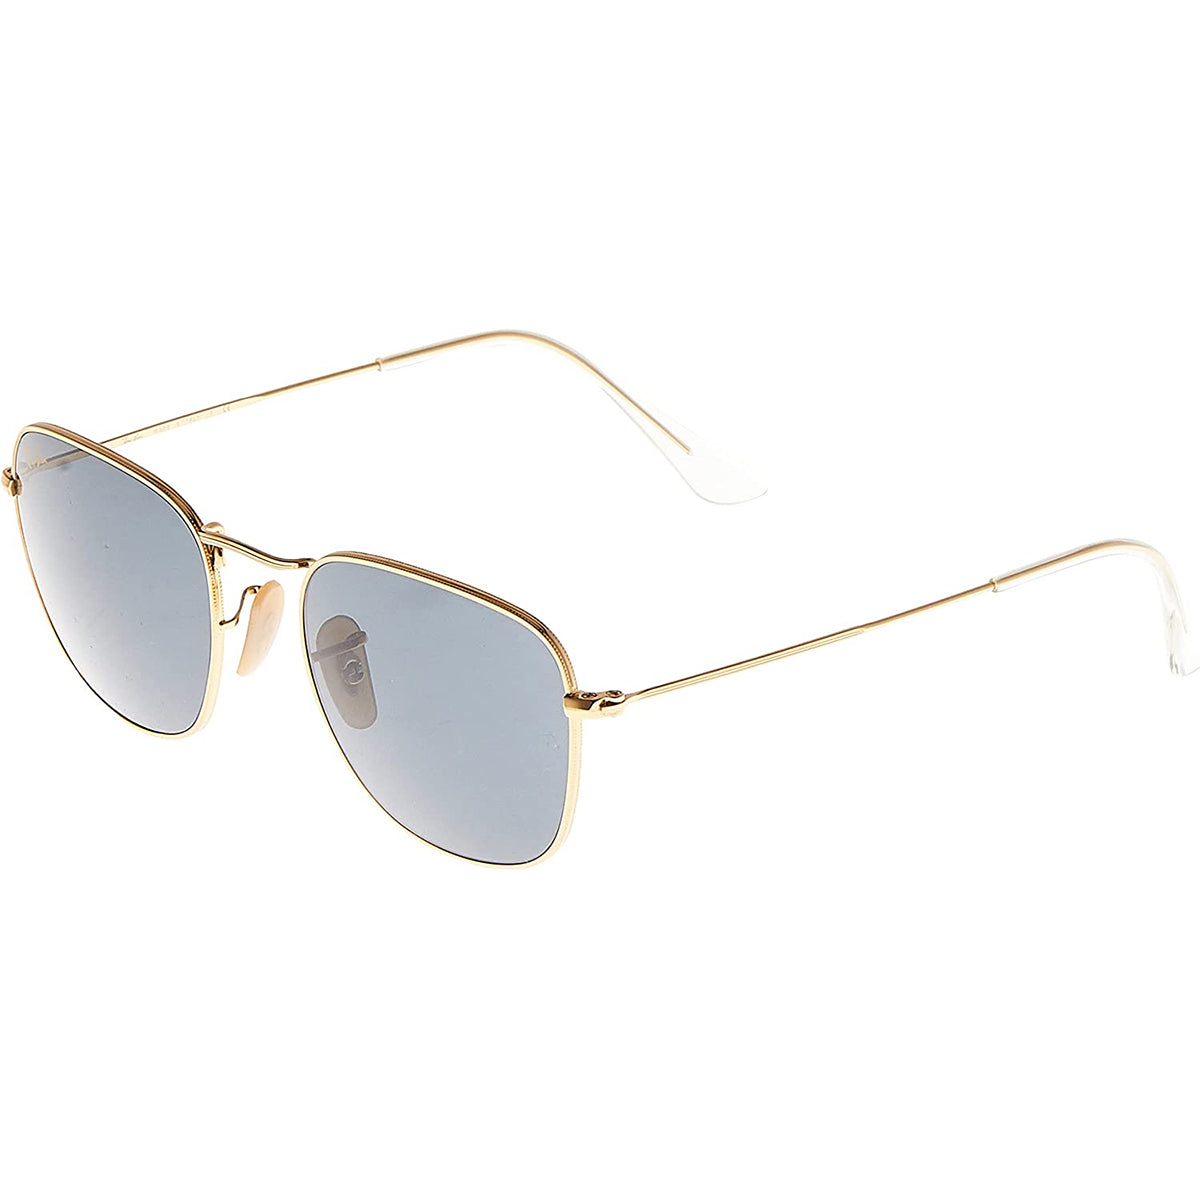 Ray-Ban Frank Legend Gold Adult Aviator Sunglasses (BRAND NEW) –   | Shop for Moto Gear